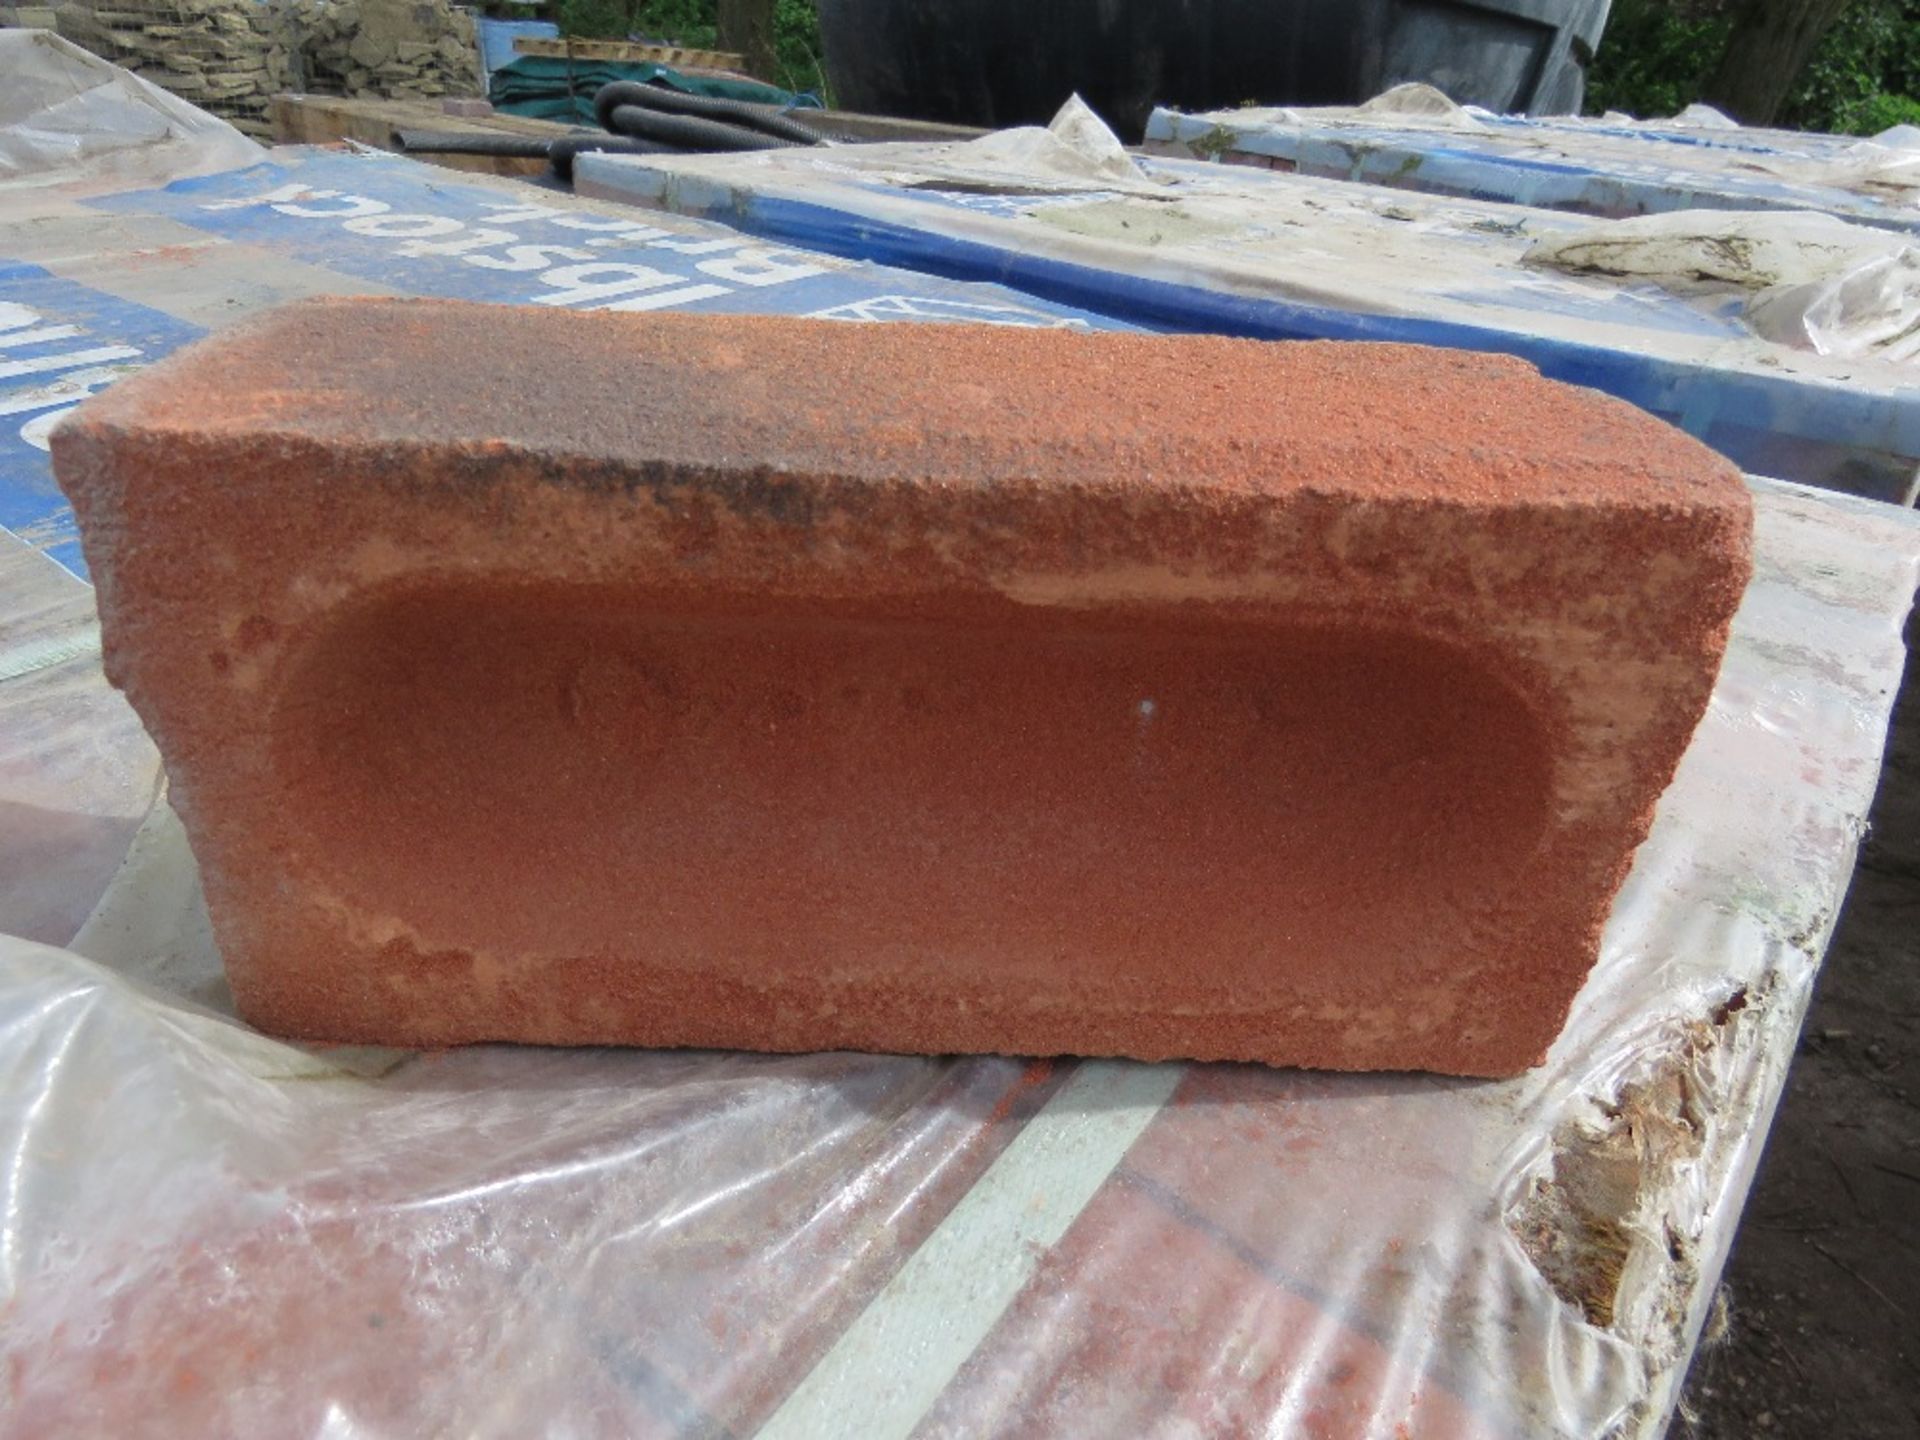 6NO PALLETS OF IBSTOCK LEICESTER AUTUMN MULTI RED BRICKS. 480NO IN EACH PACK APPROX. SURPLUS TO REQU